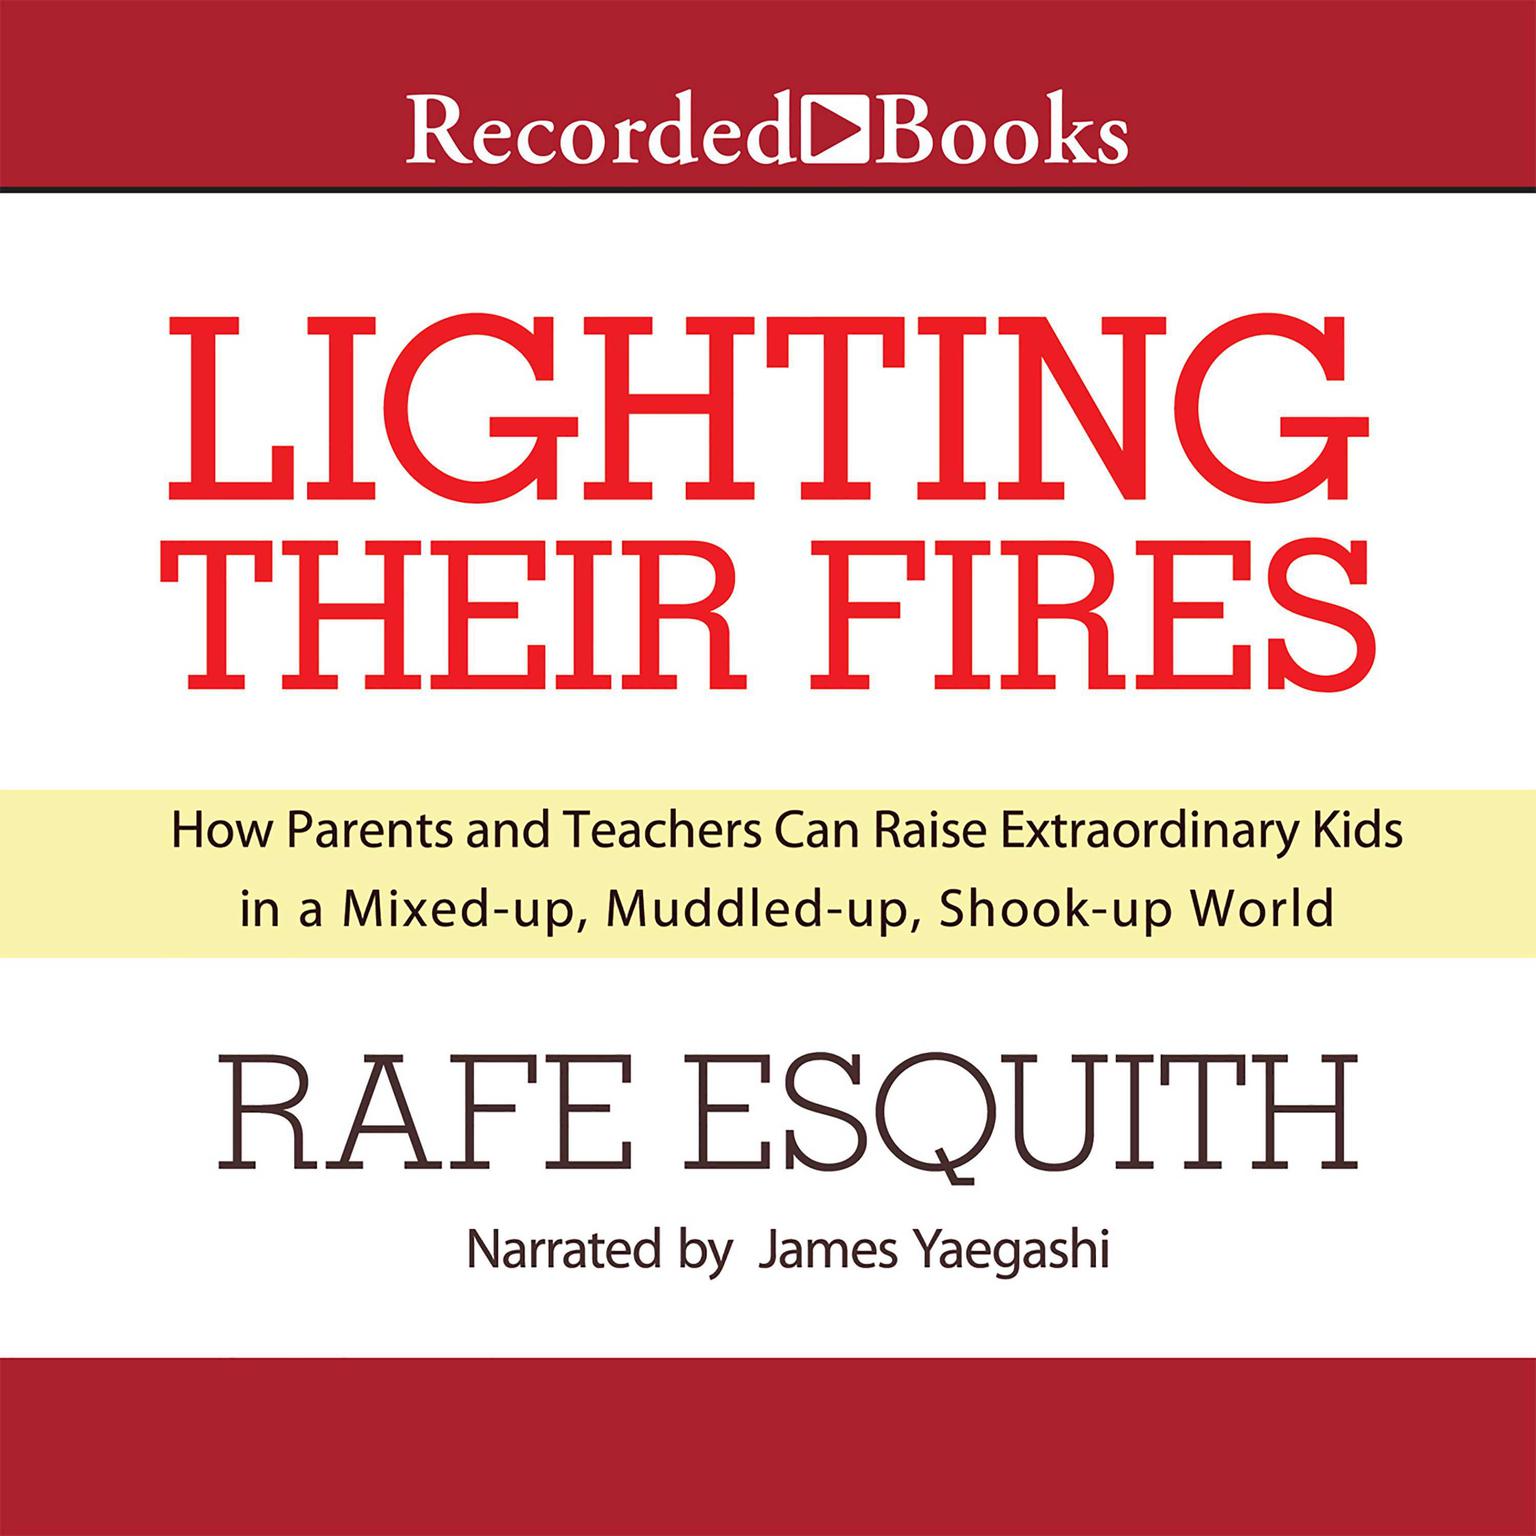 Lighting Their Fires: How Parents and Teachers Can Raise Extraordinary Kids in a Mixed-up, Muddled-up, Shook-up World Audiobook, by Rafe Esquith